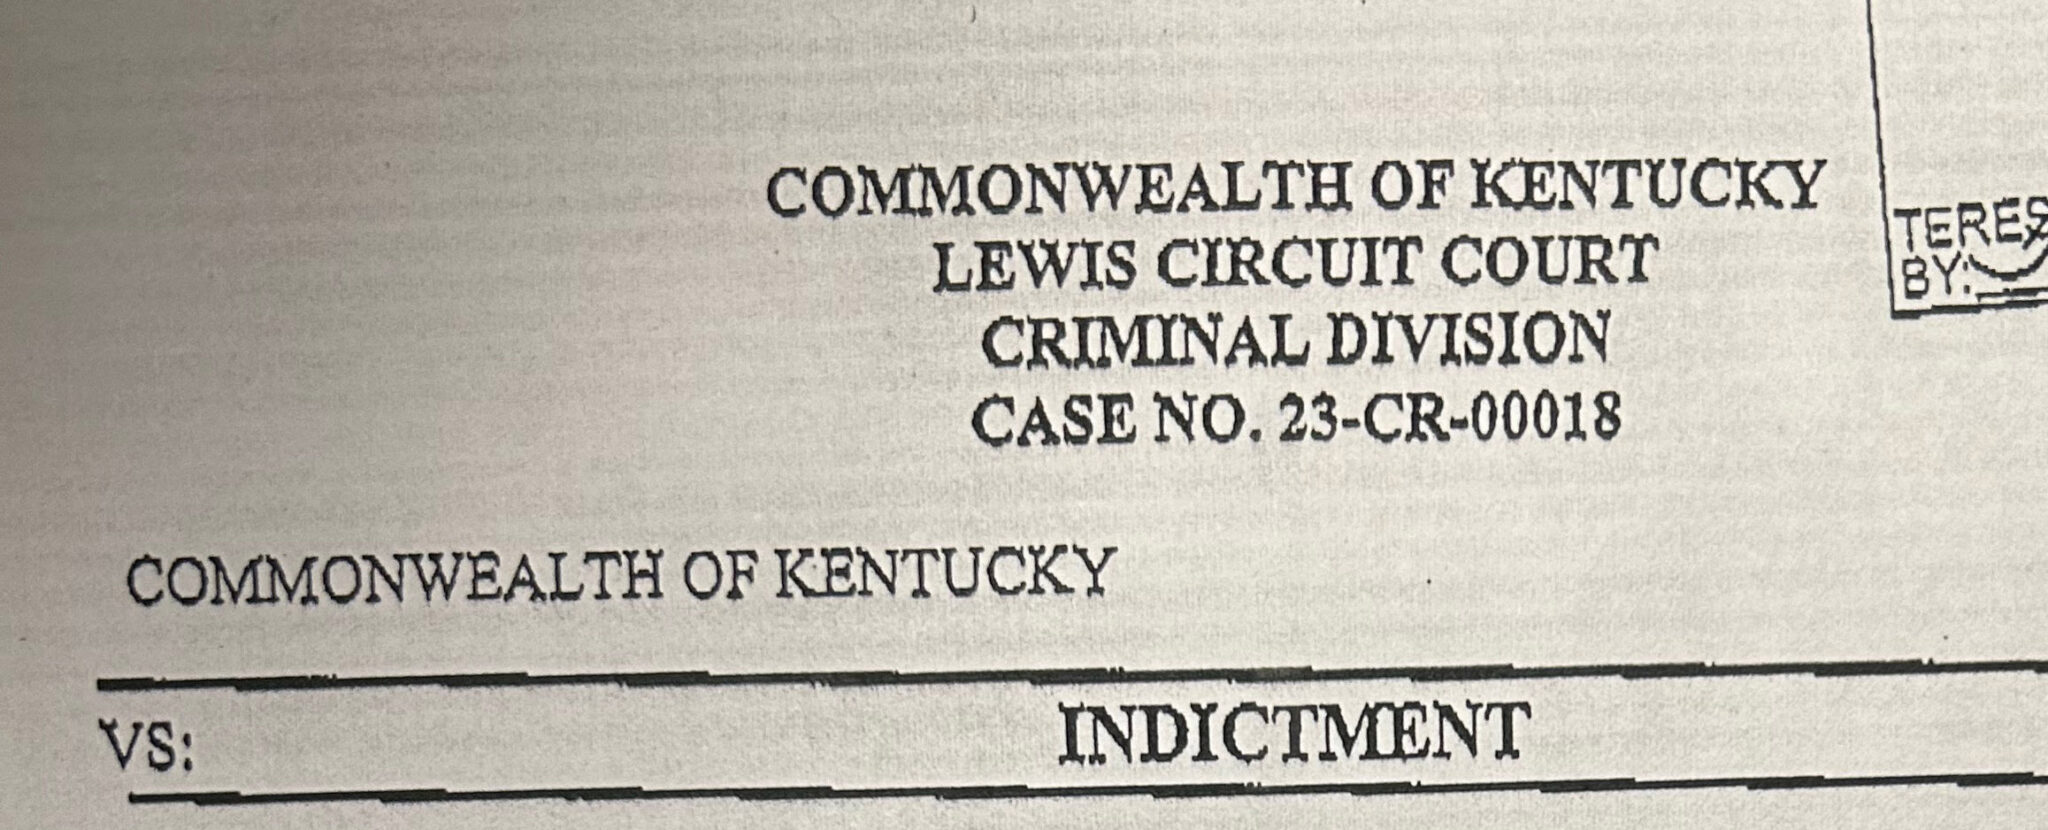 Indictments include charges of murder, attempted murder The Lewis